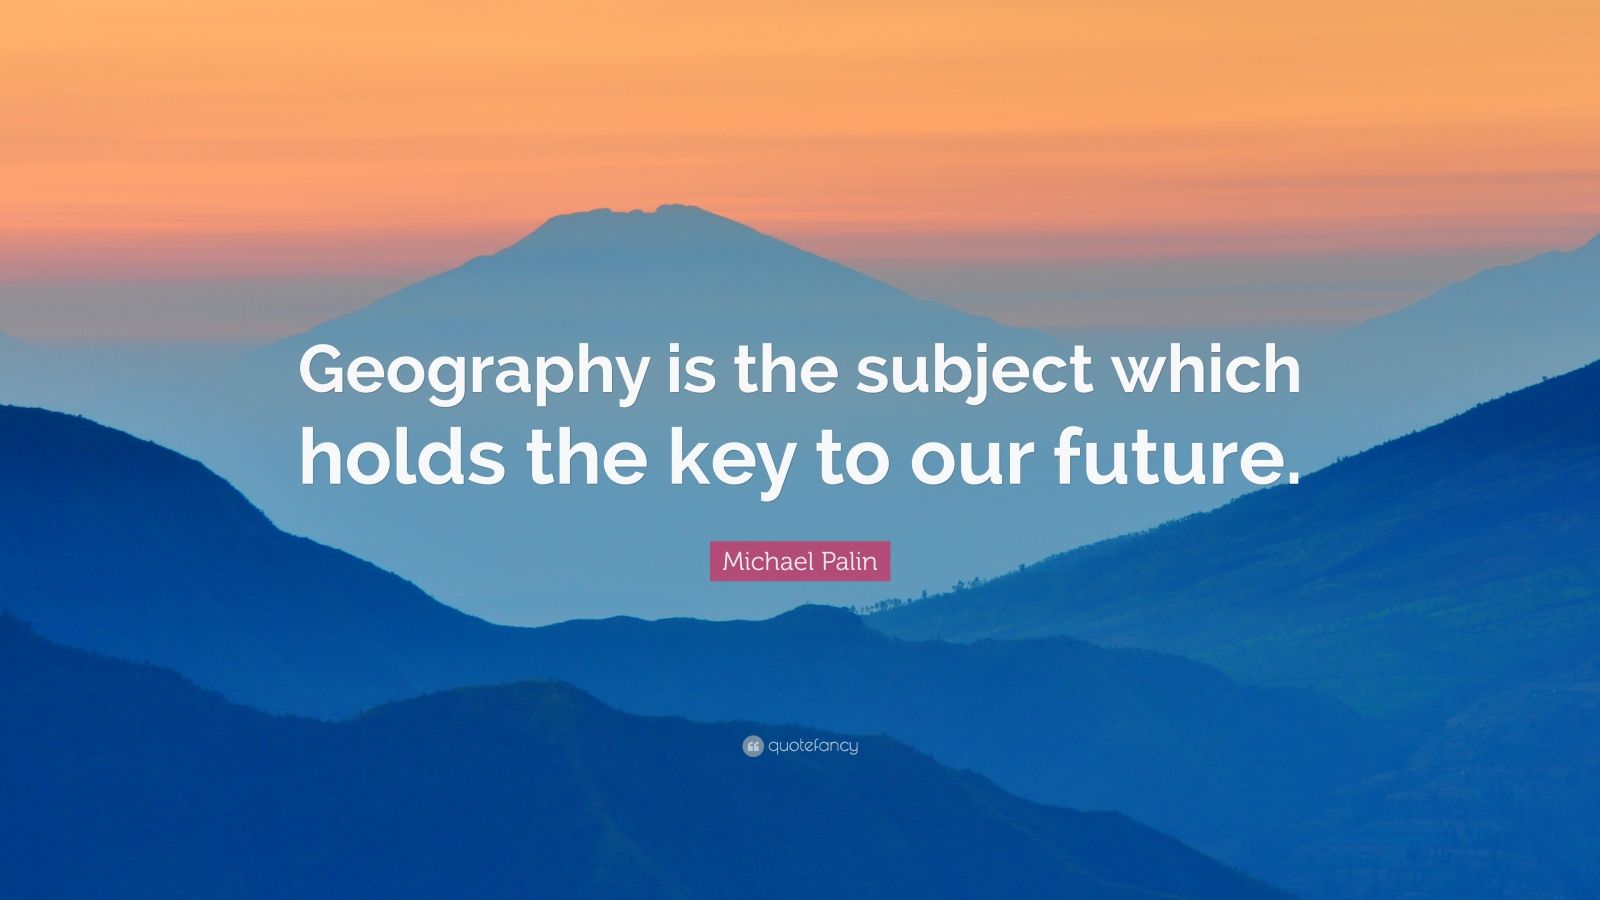 Michael Palin Quote: “Geography is the subject which holds the key to